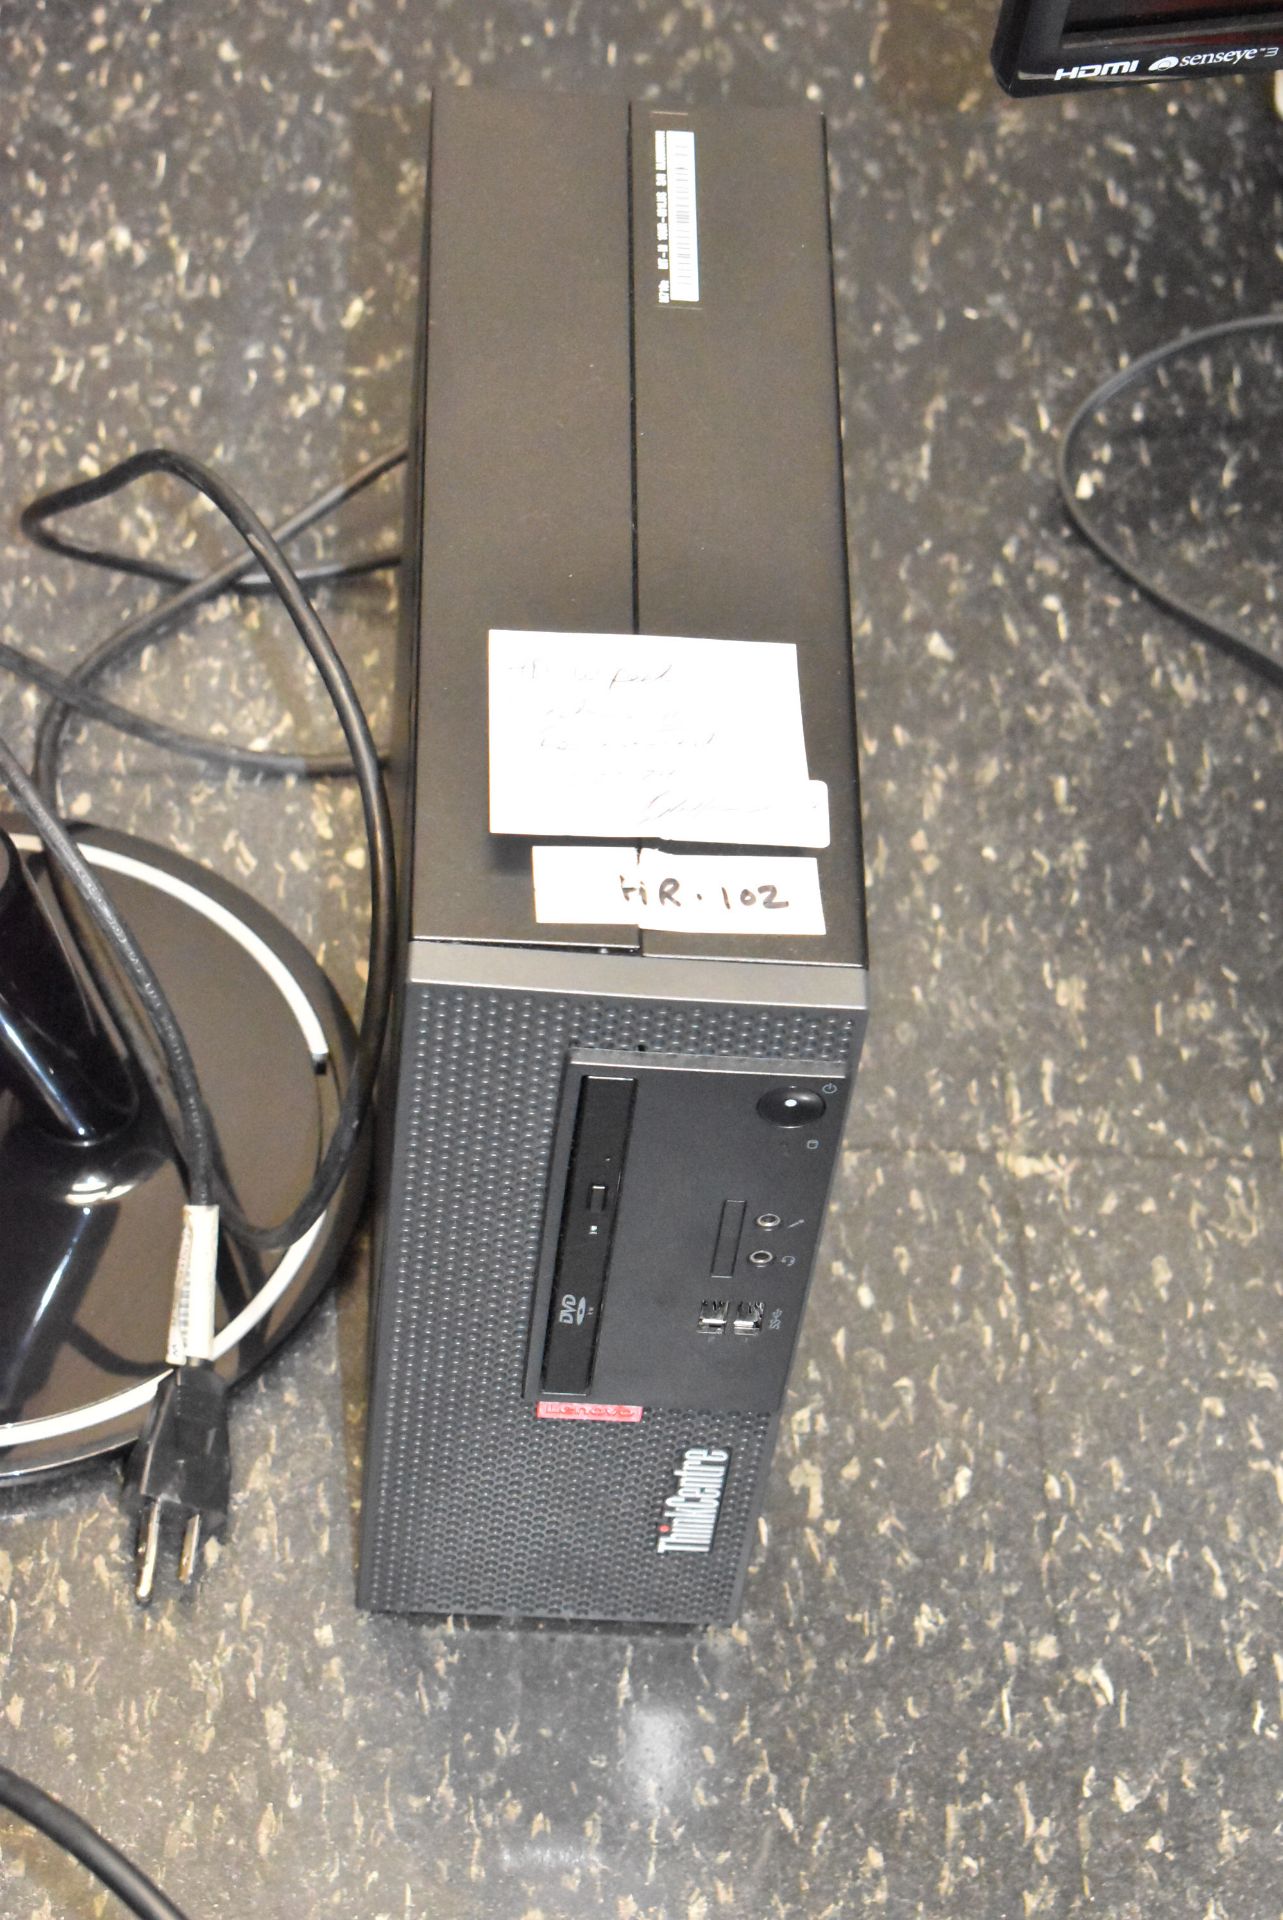 LOT/ LENOVO THINKCENTRE COMPUTER WITH VIEWSONIC MONITOR - Image 2 of 2